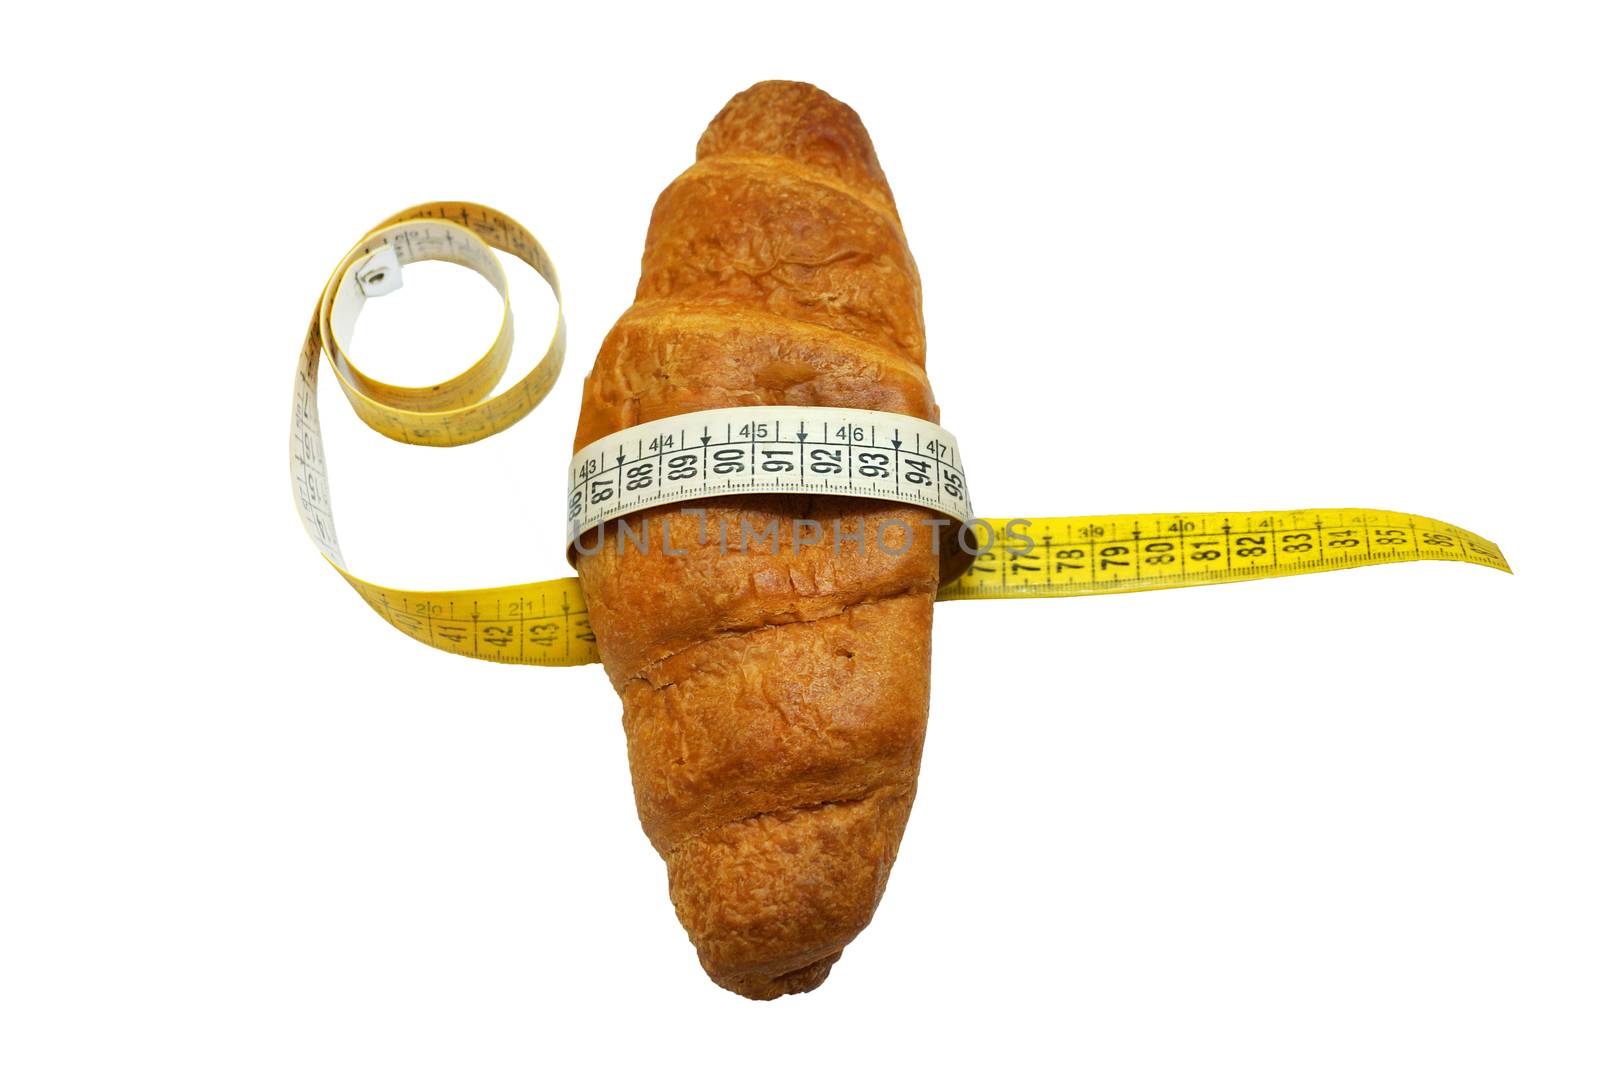 soft measuring ruler wrapped around a croissant as a symbol of unhealthy nutrition, isolate on a white background